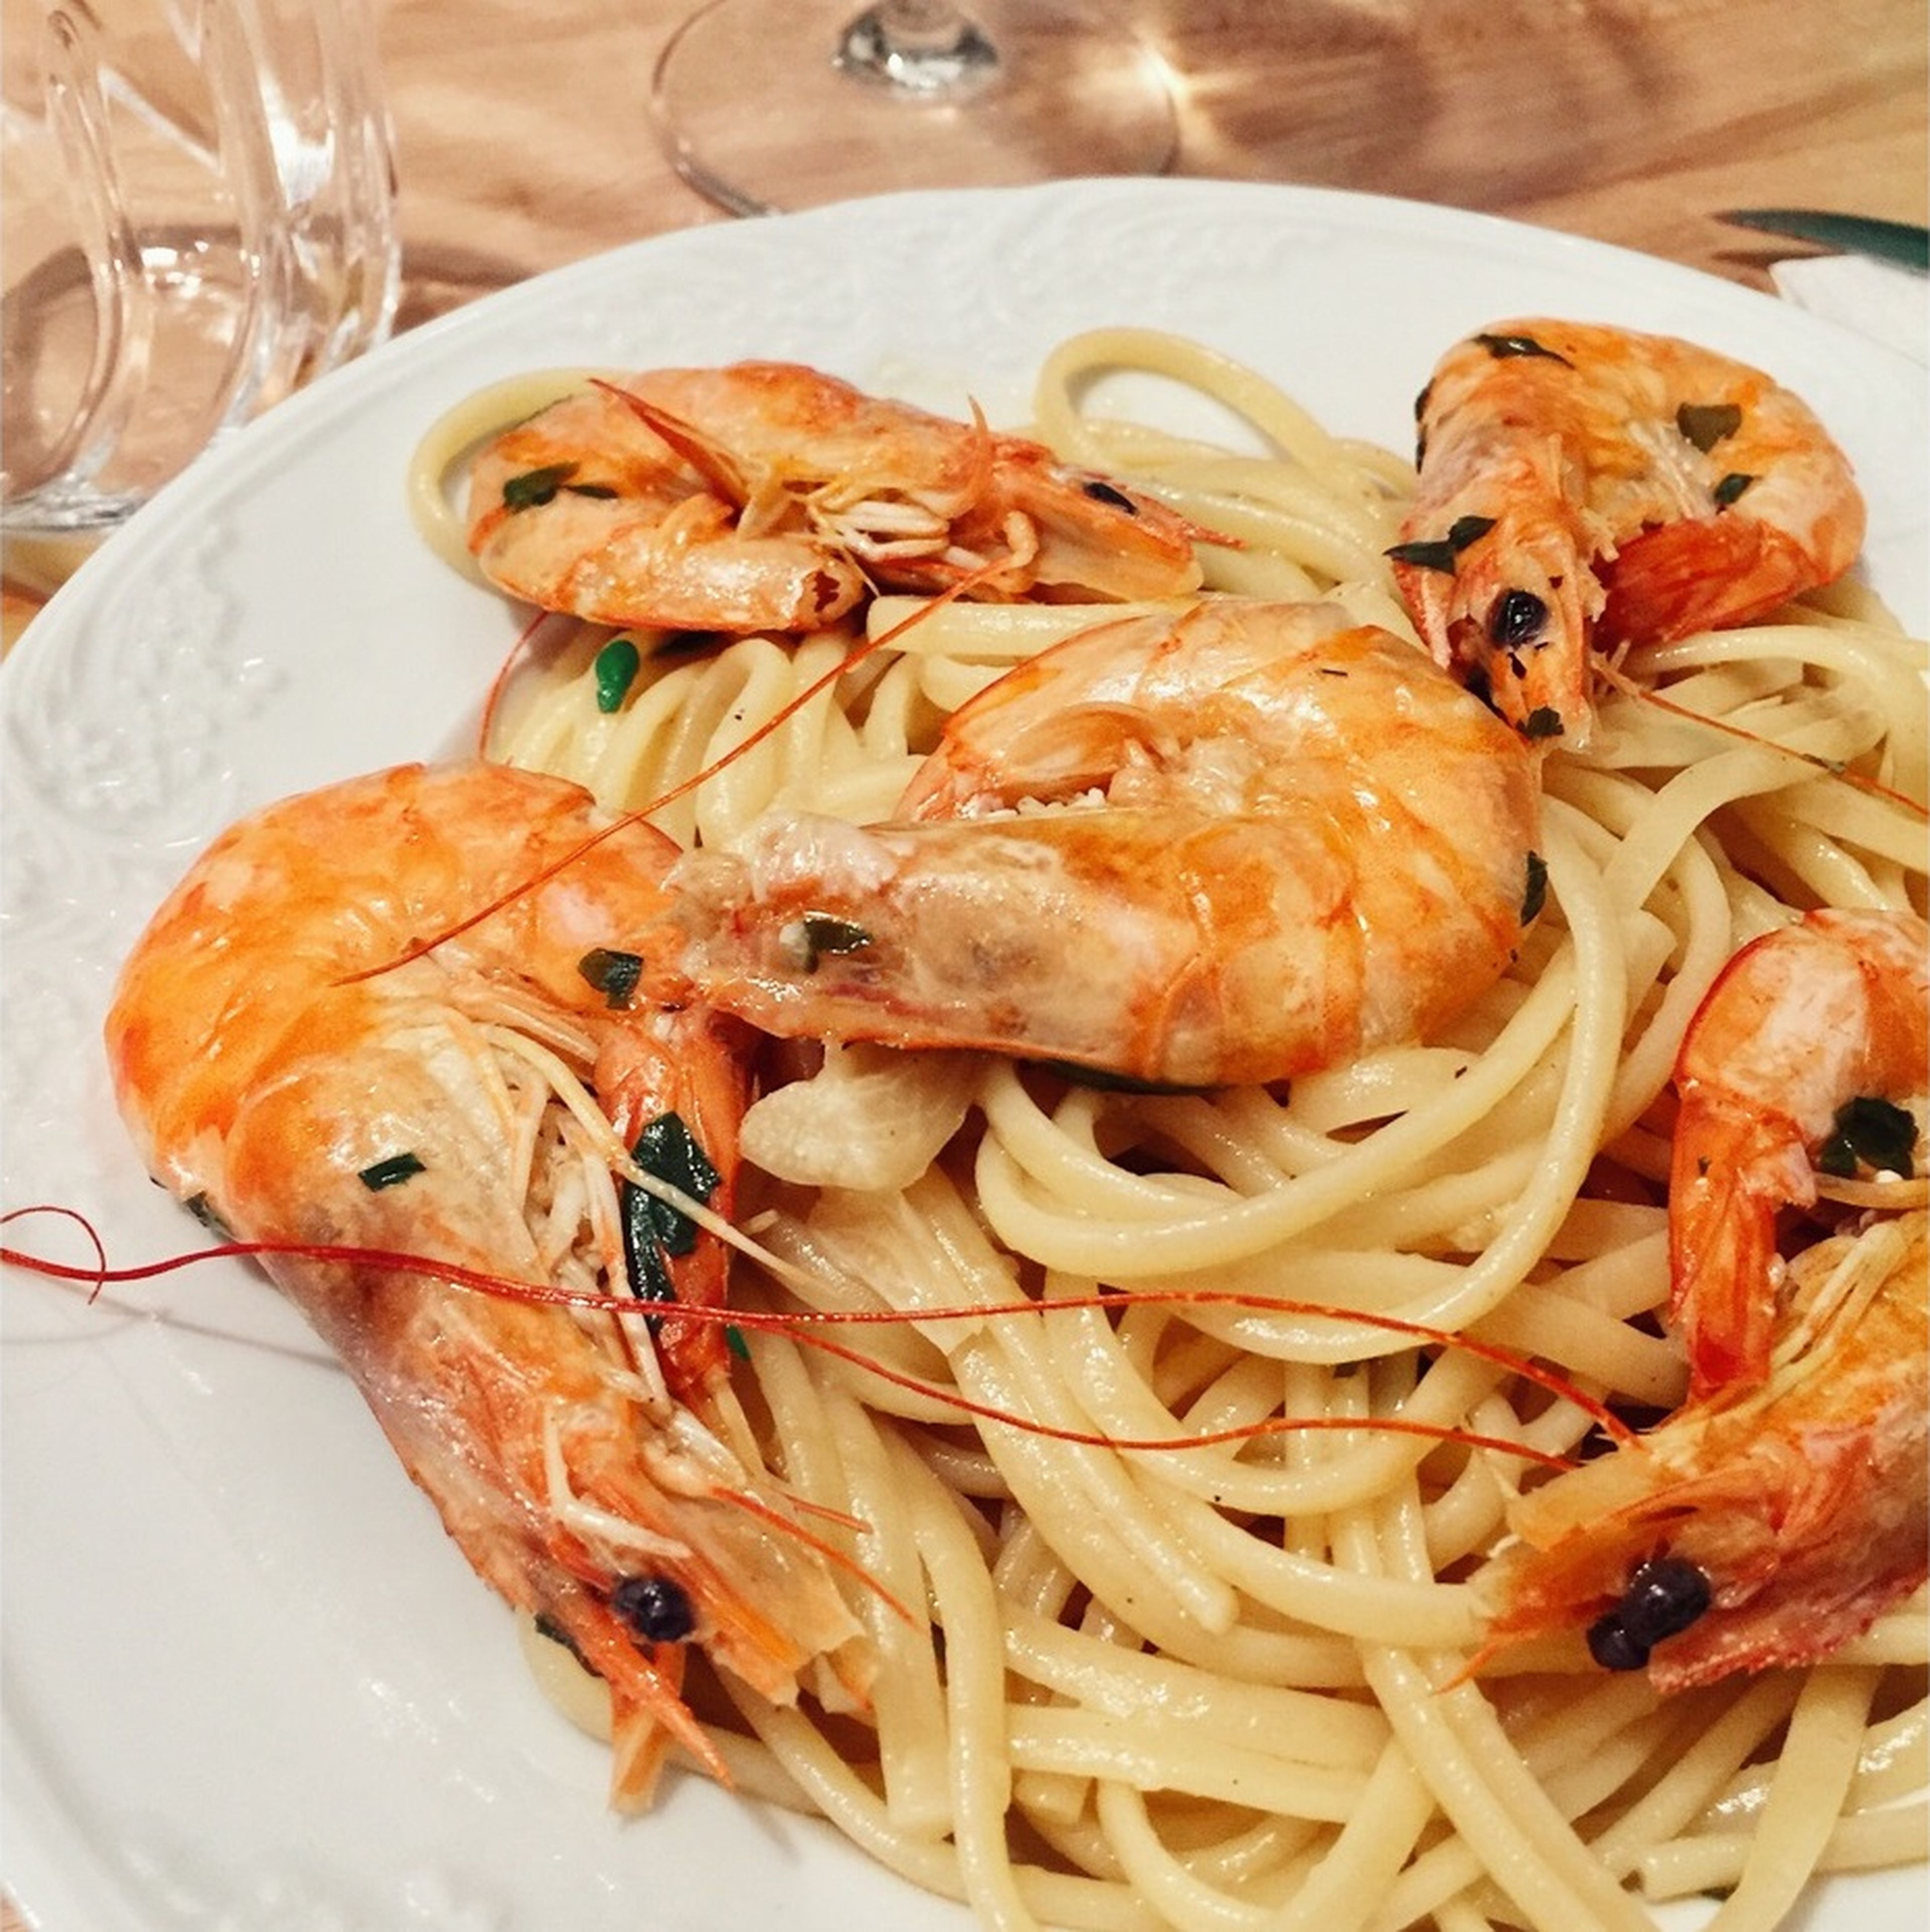 Angel hair pasta with shrimp in white wine sauce